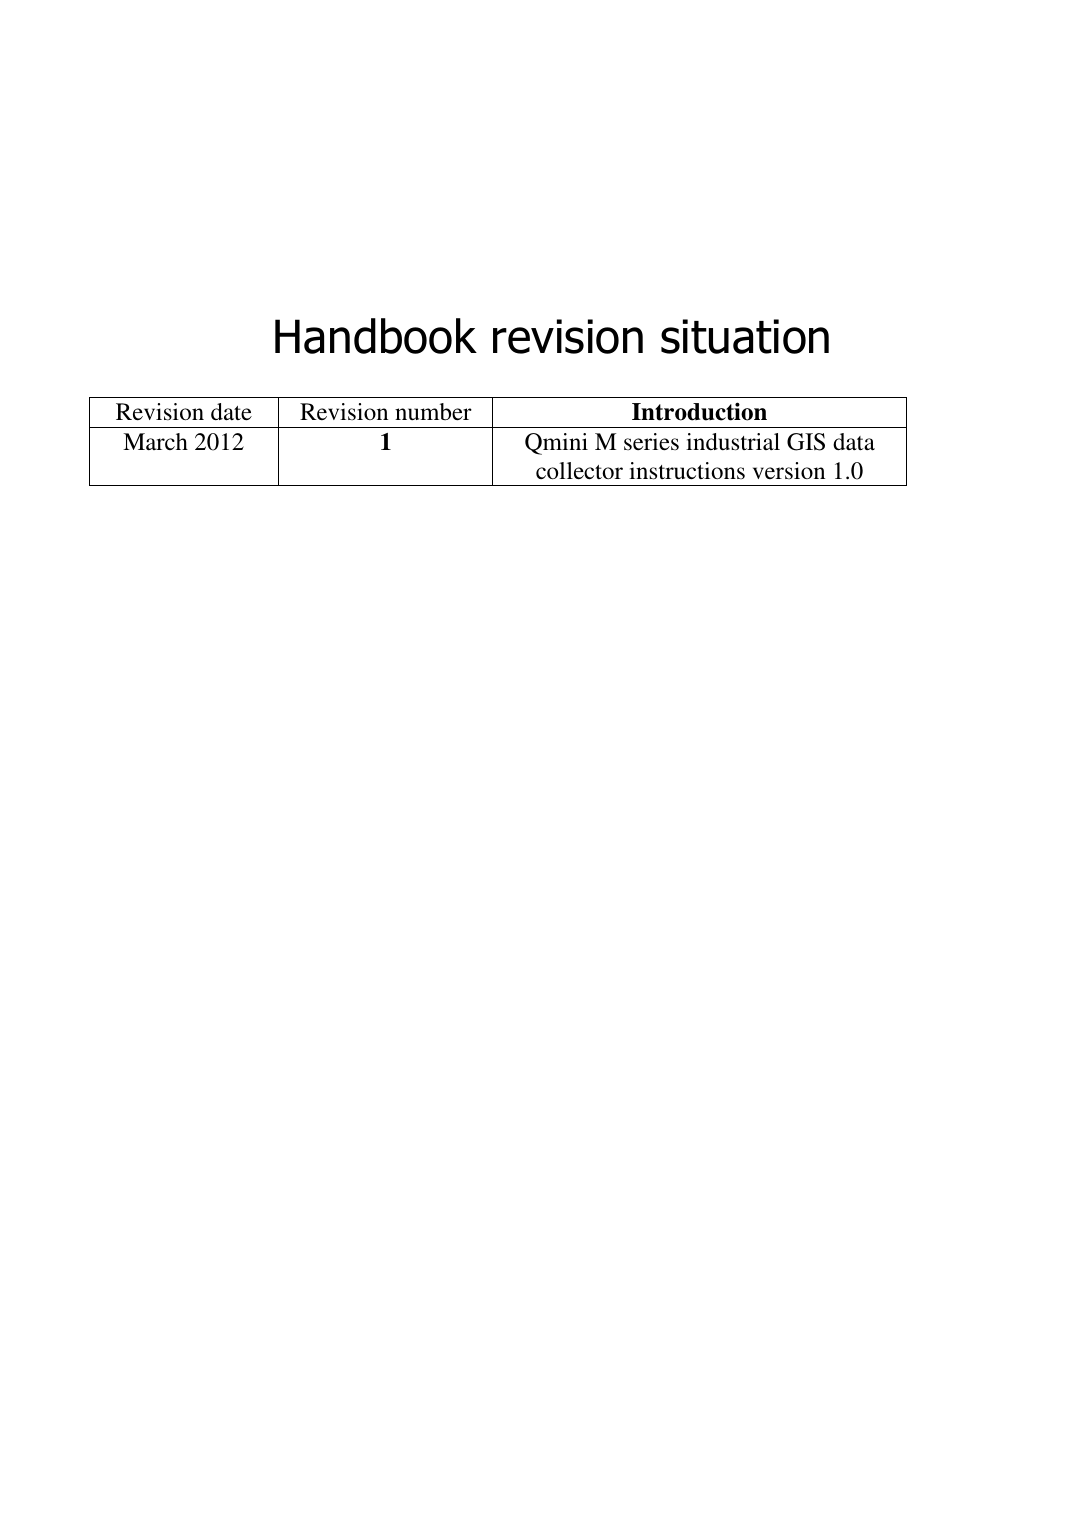    Handbook revision situation Revision date Revision number Introduction March 2012 1  Qmini M series industrial GIS data collector instructions version 1.0        